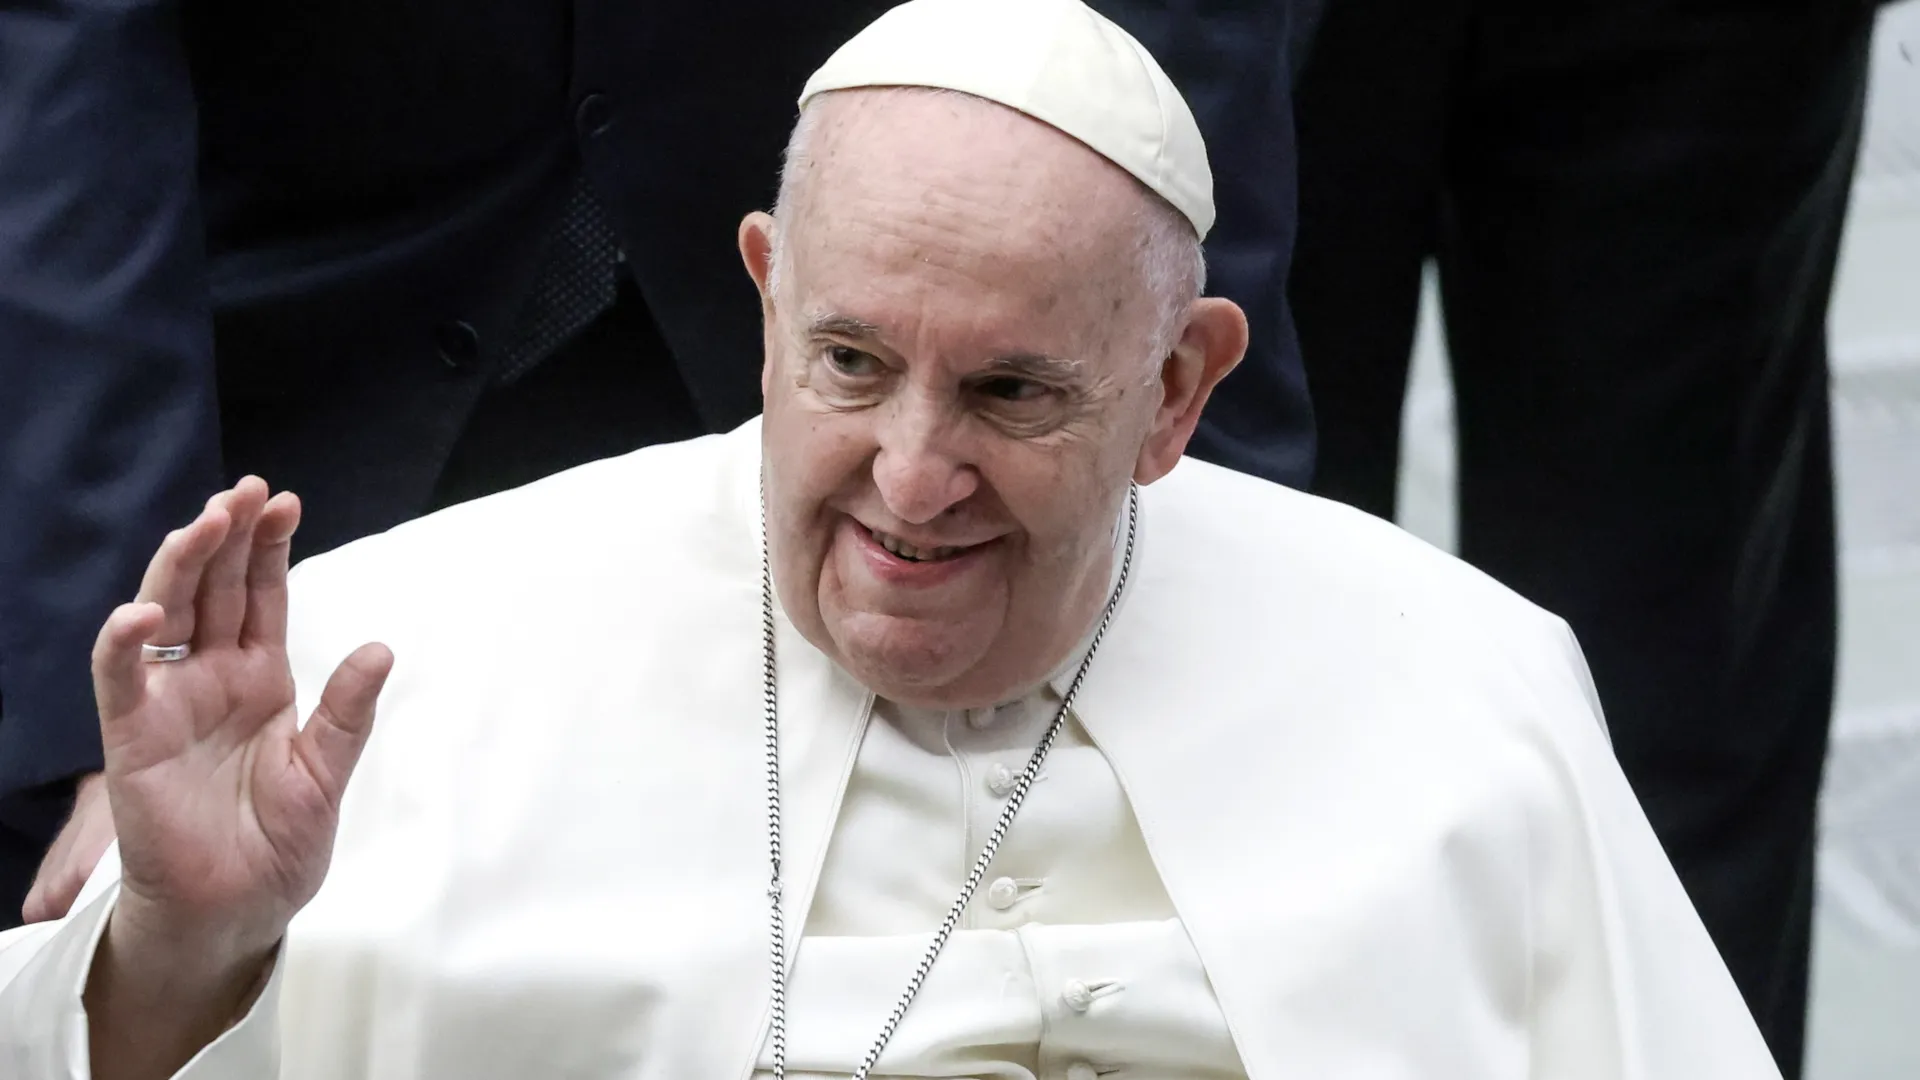 Pope Francis. Photo: Shutterstock